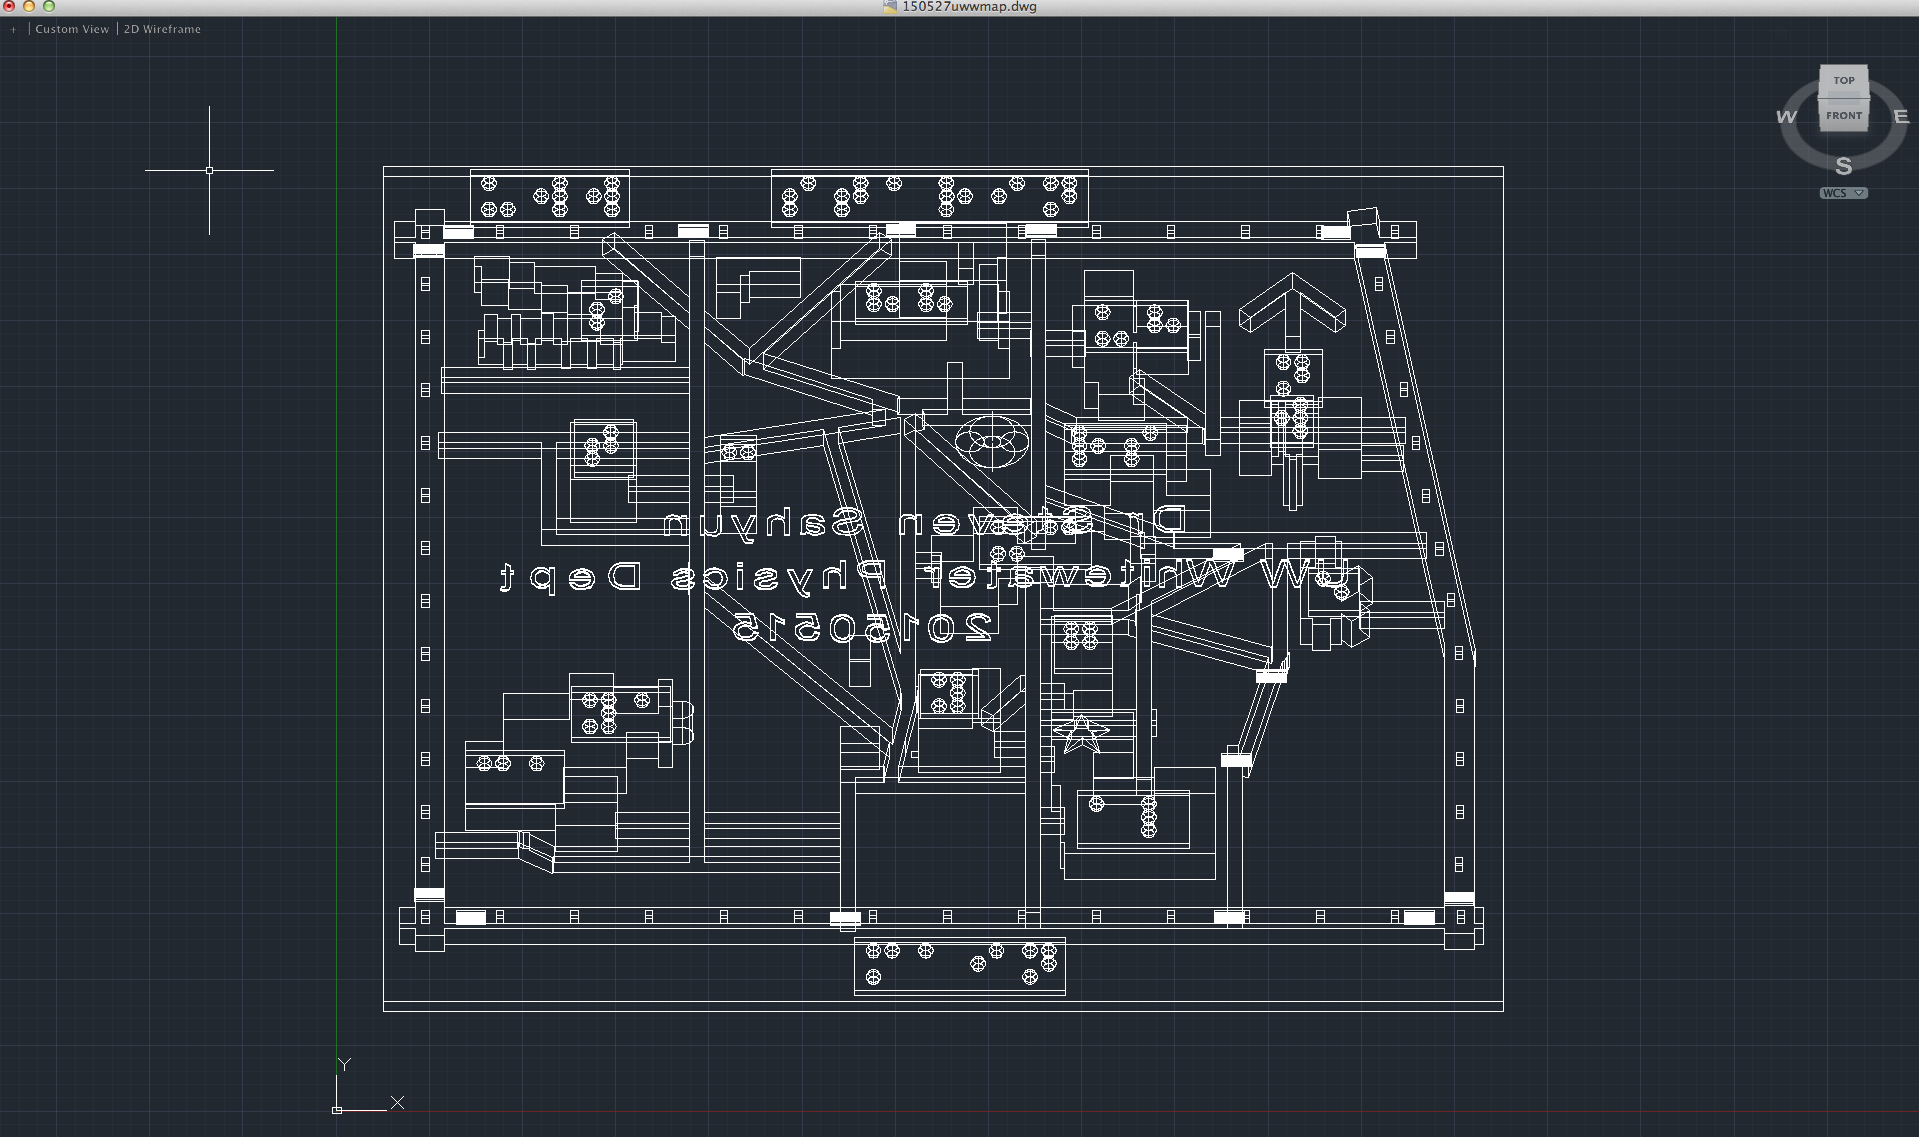 Picture of AutoCAD file.